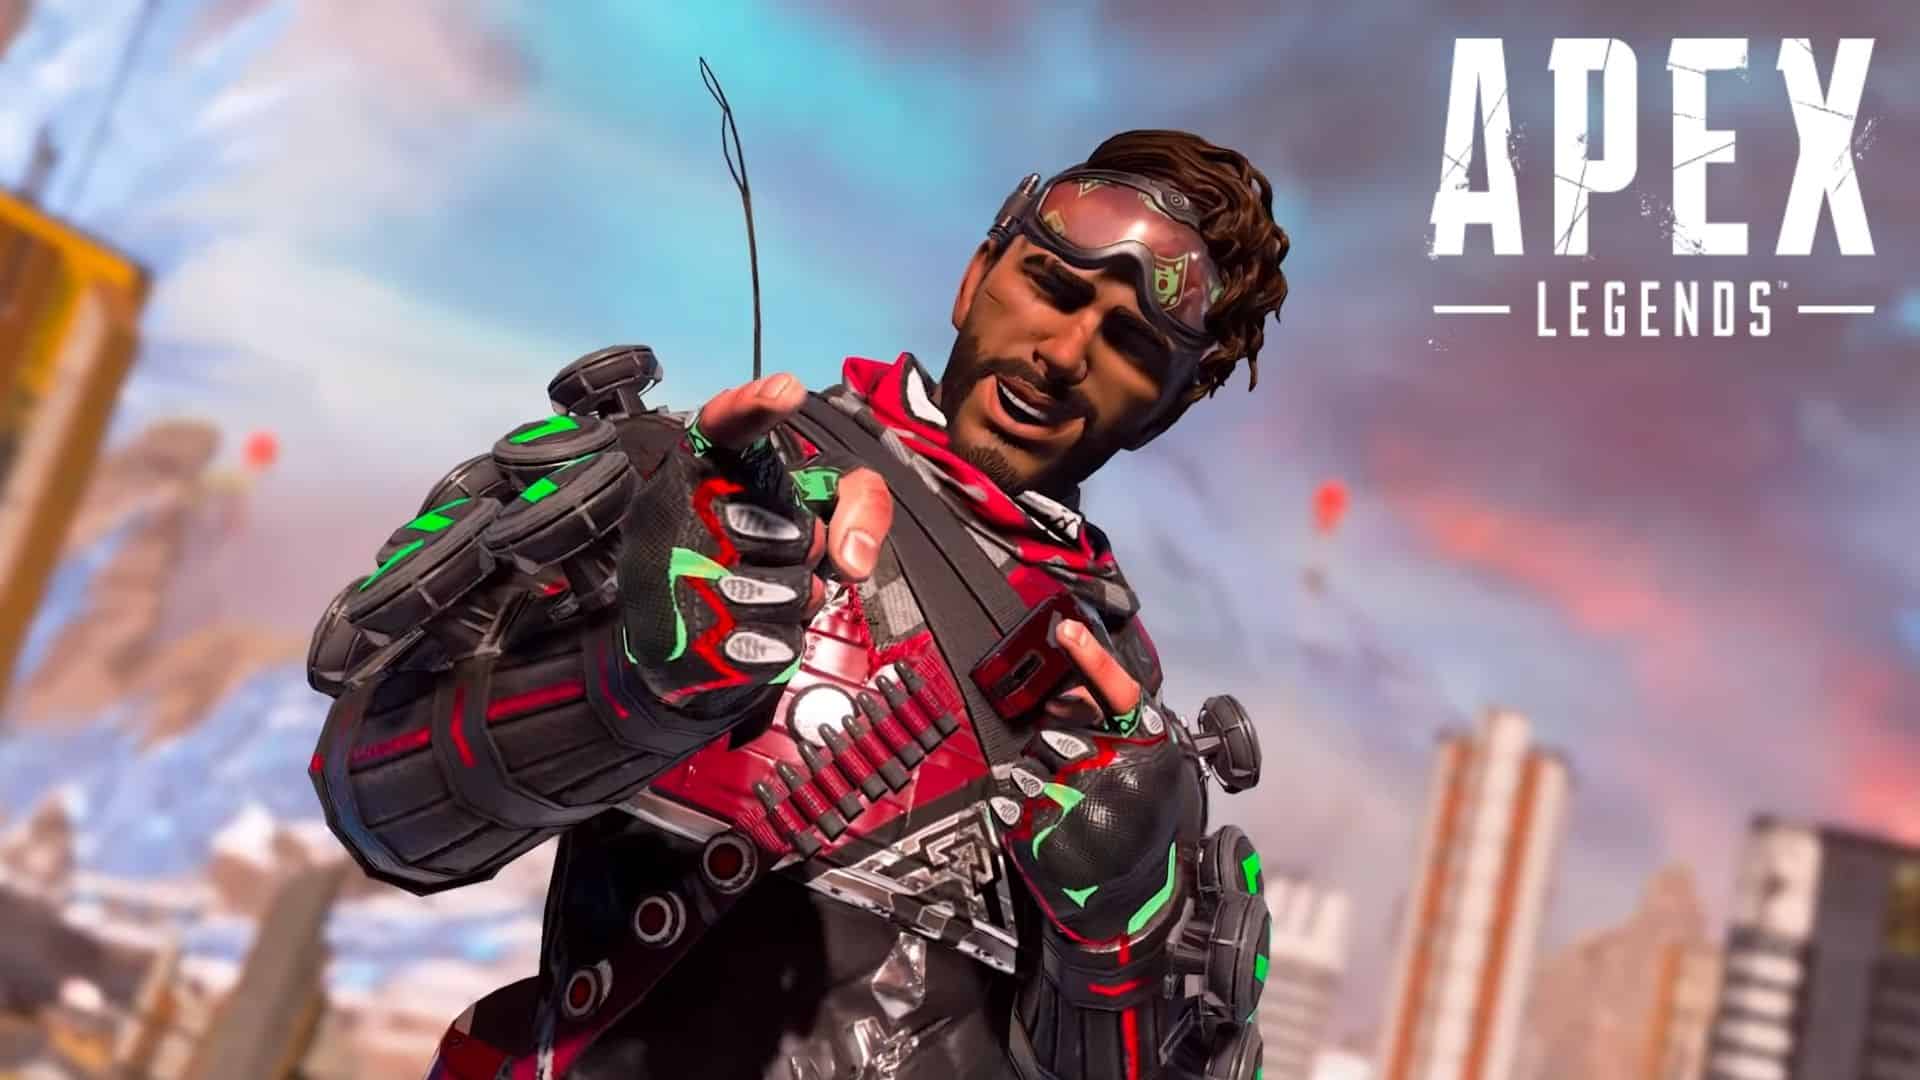 Mirage in Apex Legends in red skin with logo